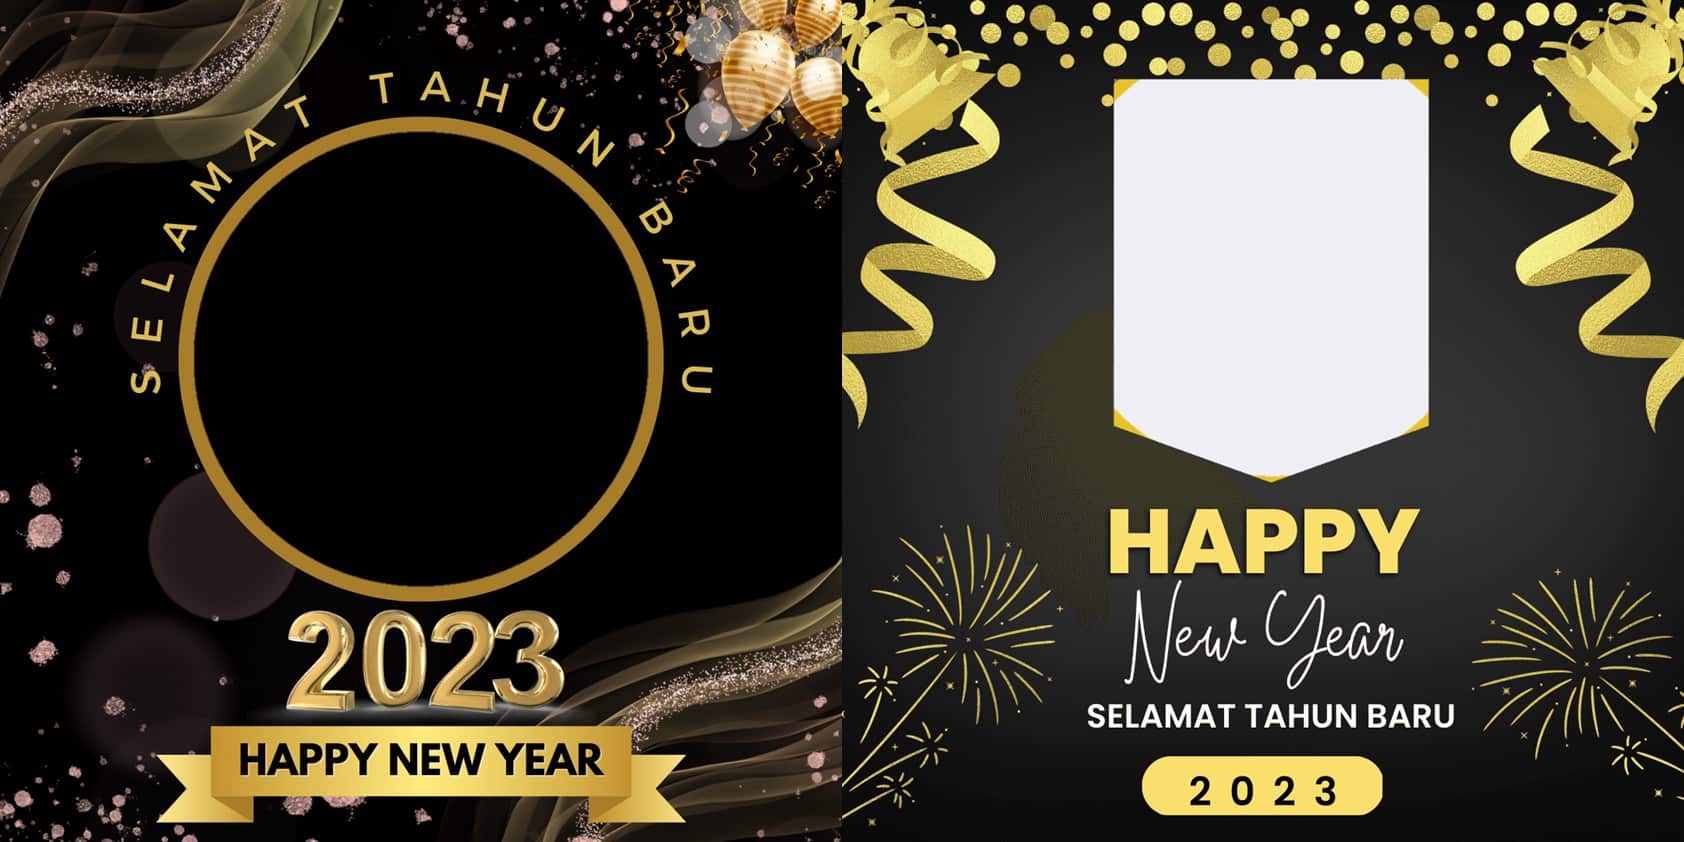 40 Free Happy New Year 2023 Twibbon Links To Celebrate The New Year - Rancah Post